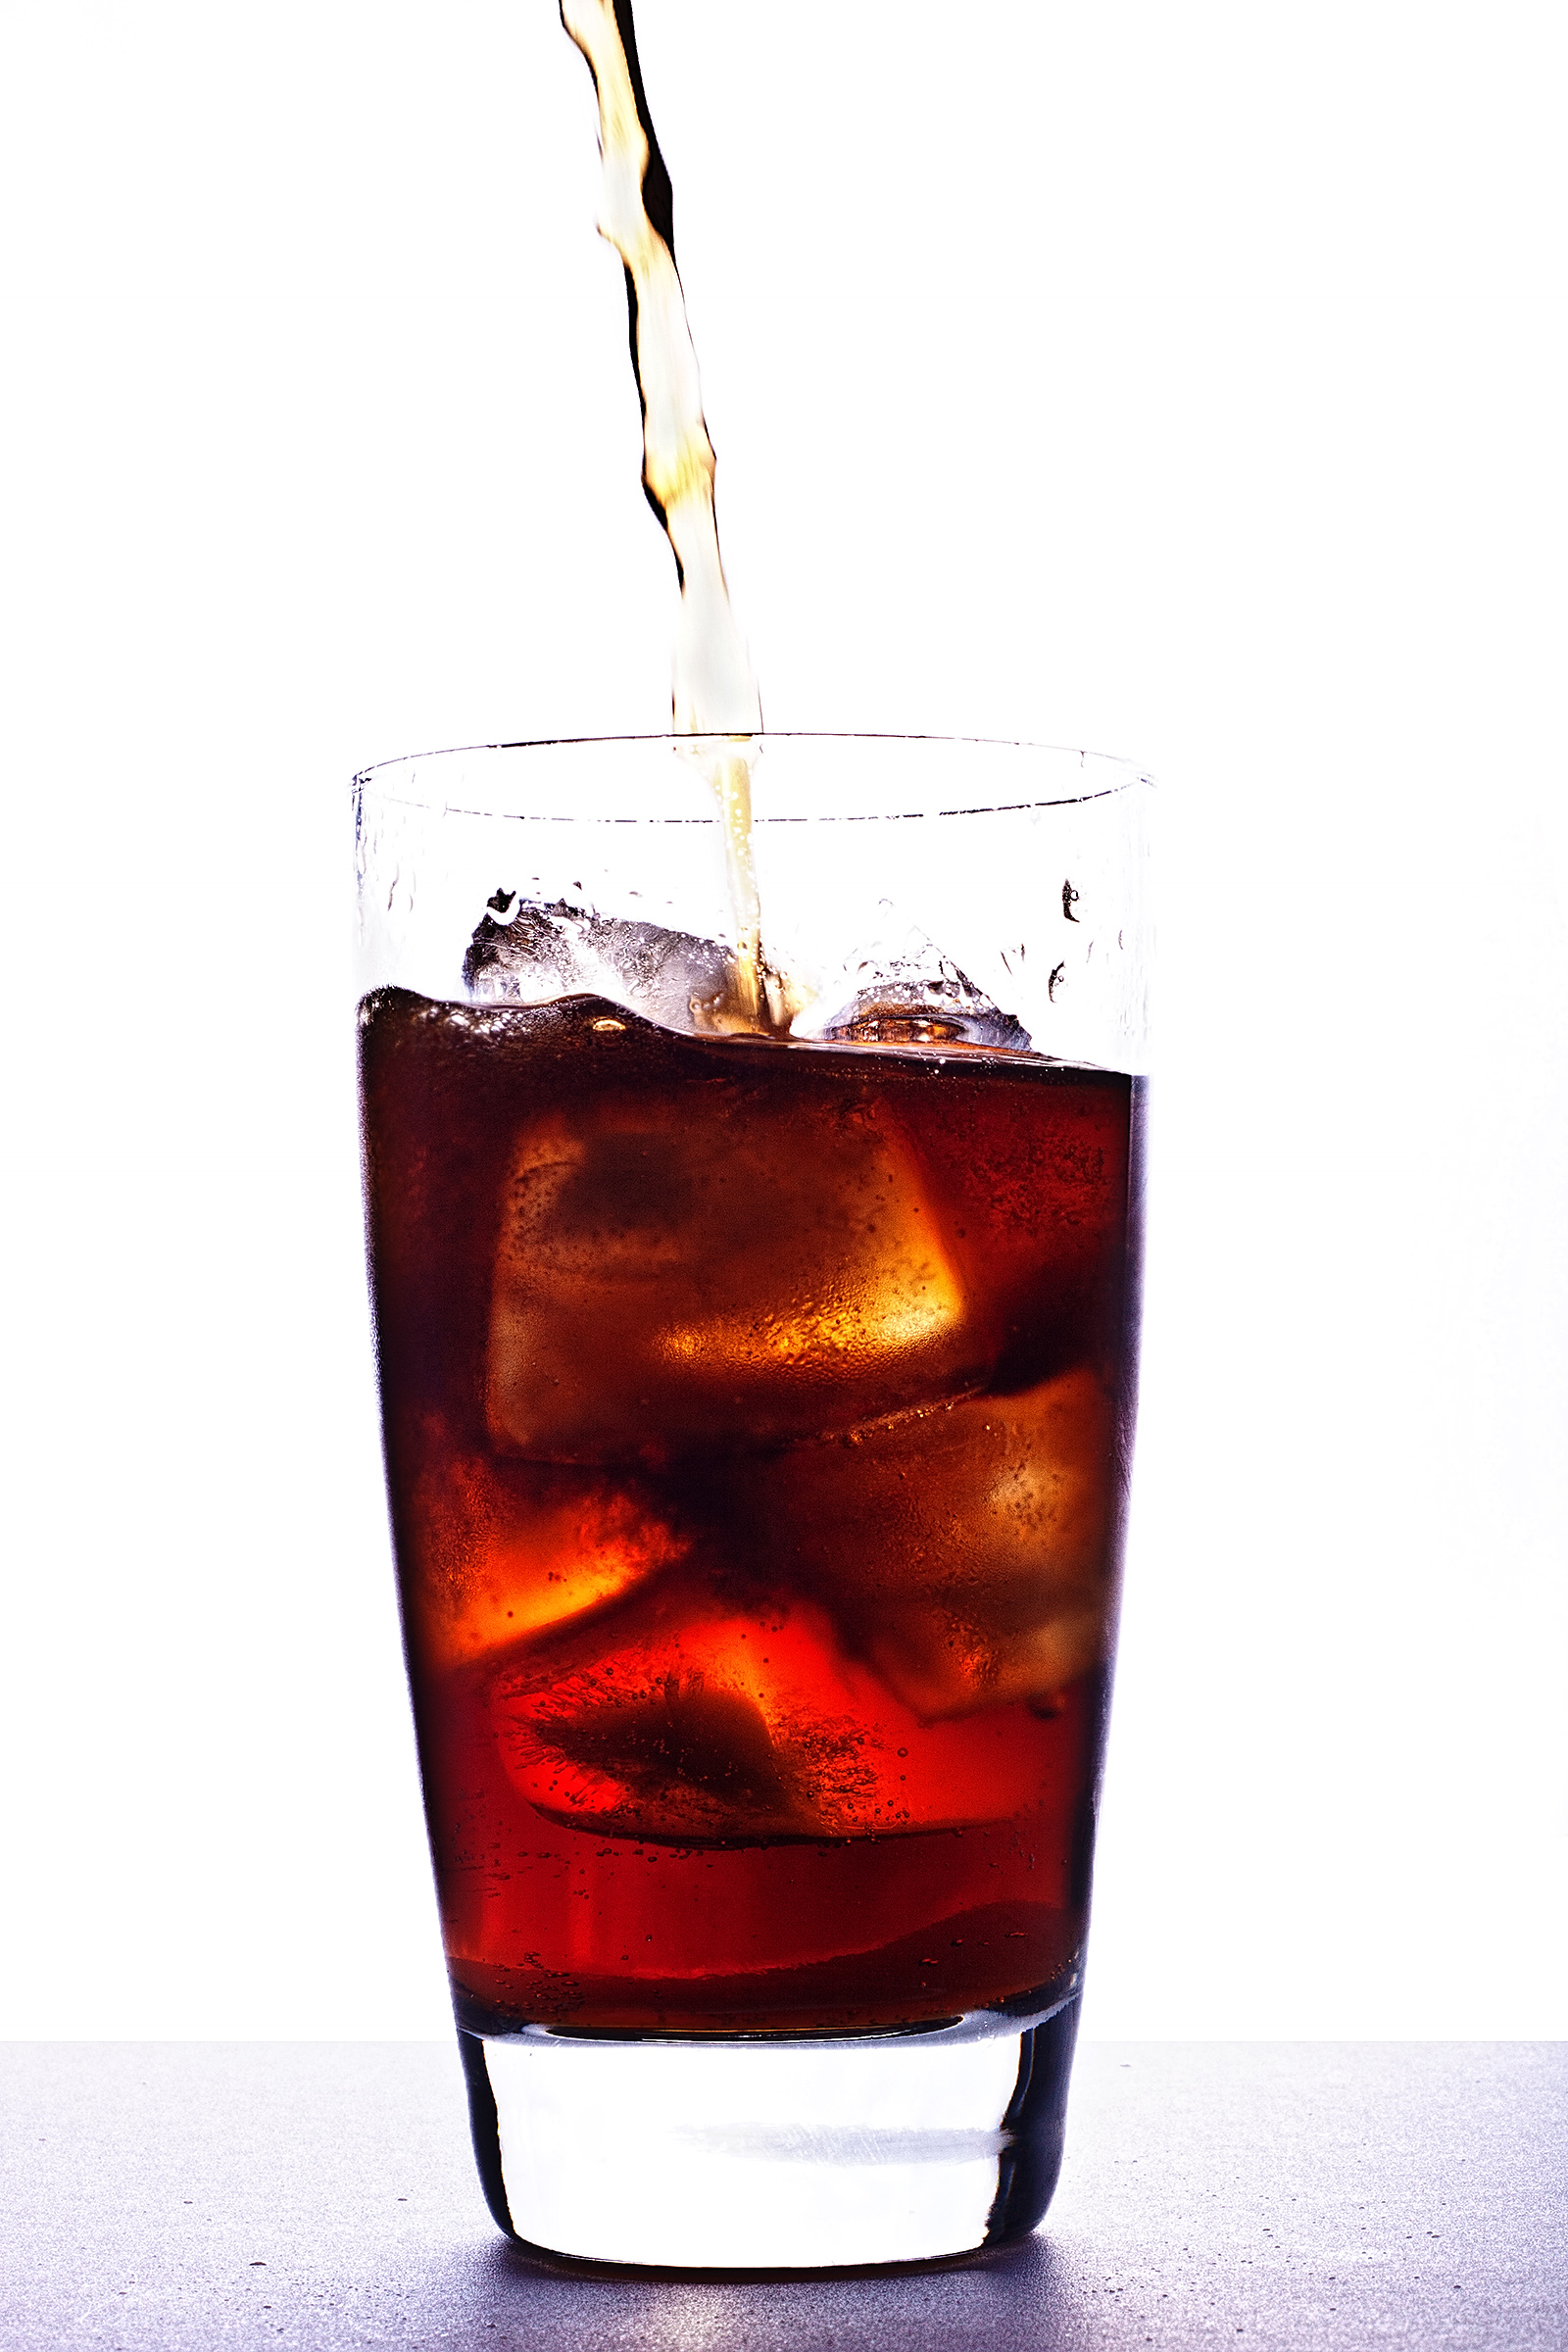 Weight Loss Happy: Diet Soda &amp; Dropping Pounds - Happy Healthy Hub